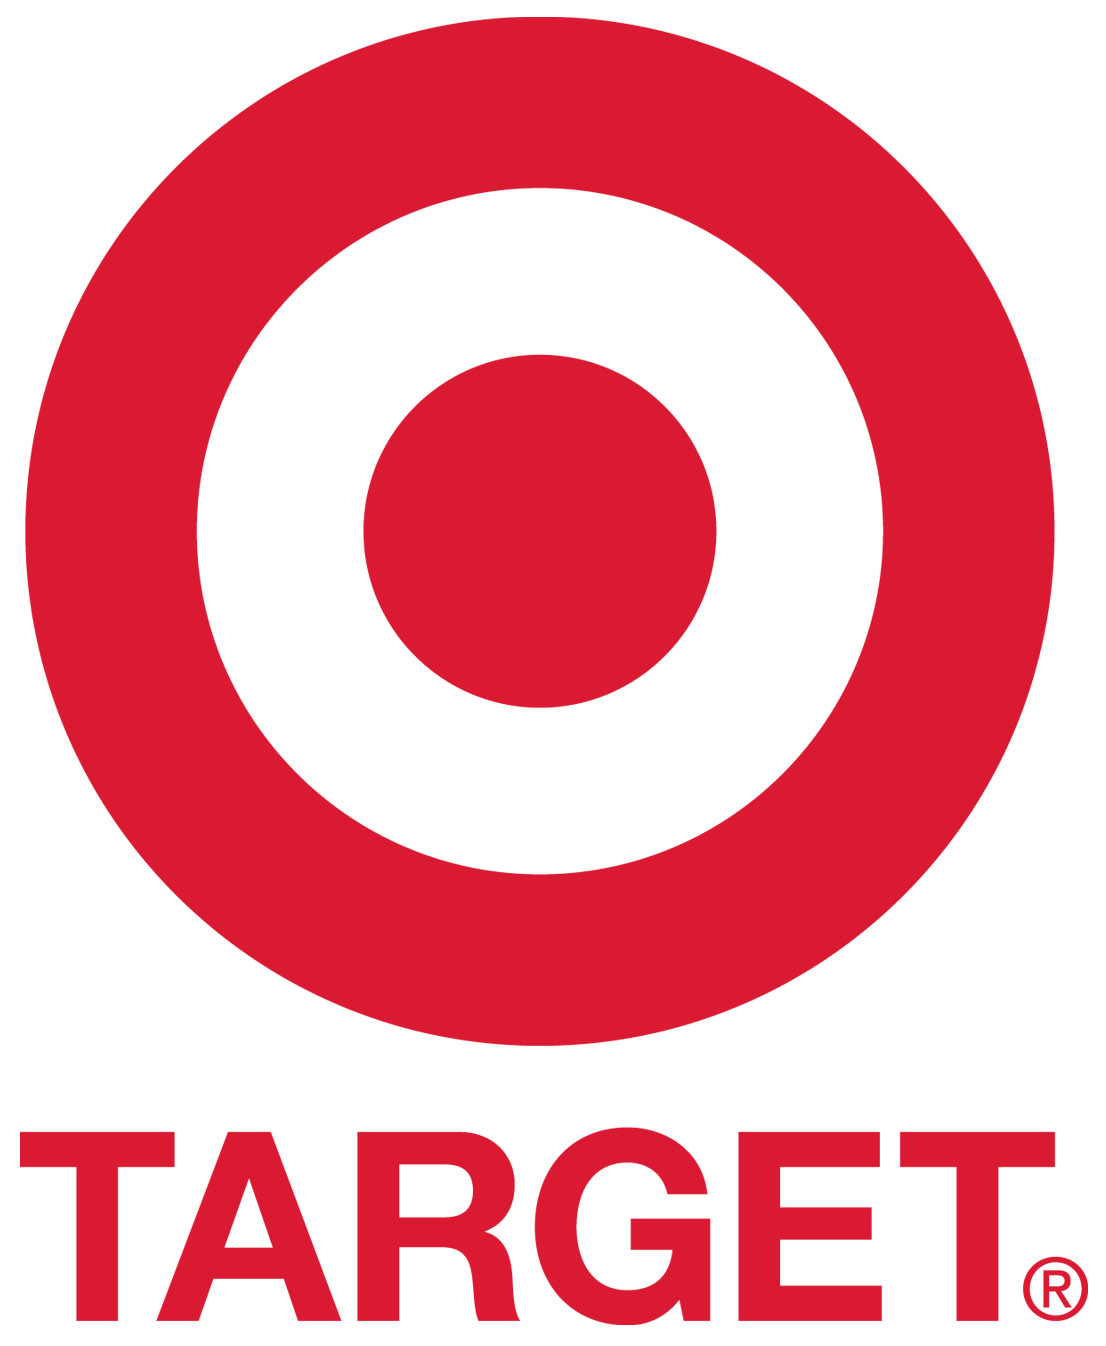 Are You Walmart or Target?